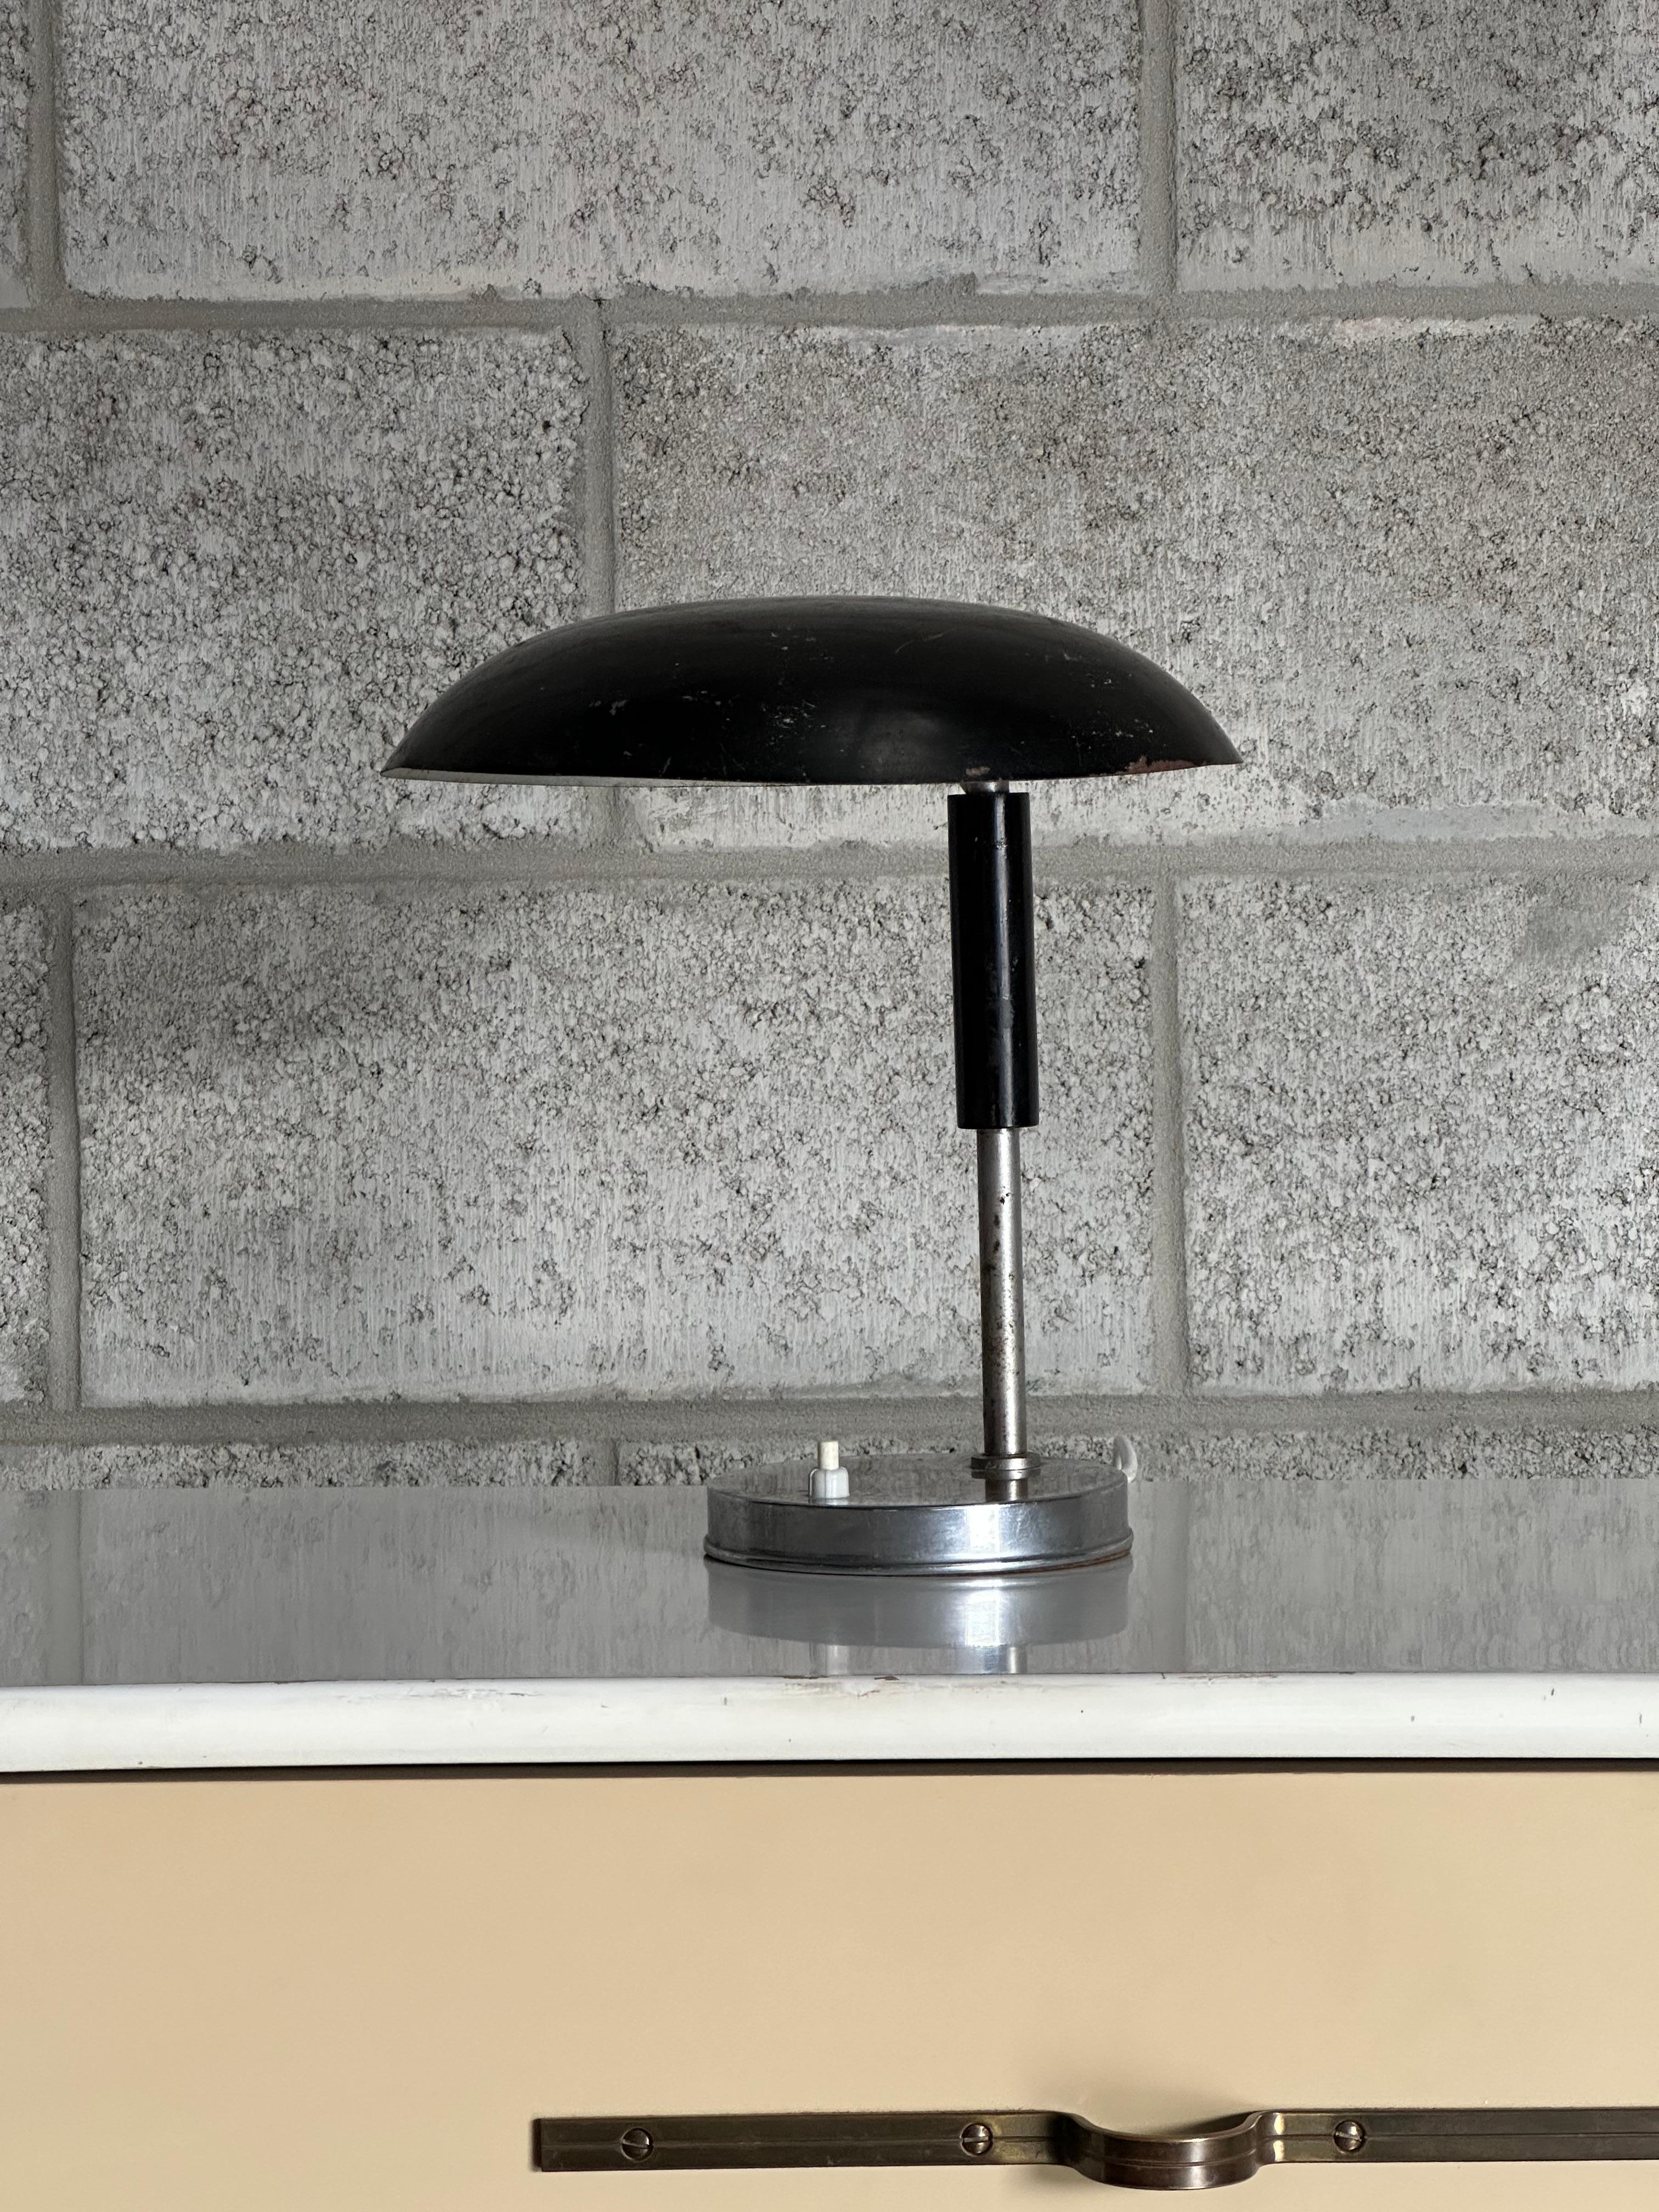 A beautiful Swedish lamp circa 1940's, very much in the Bauhaus style. Great form and minimalist design while being functional. Lamp is attributed to Harald Notini